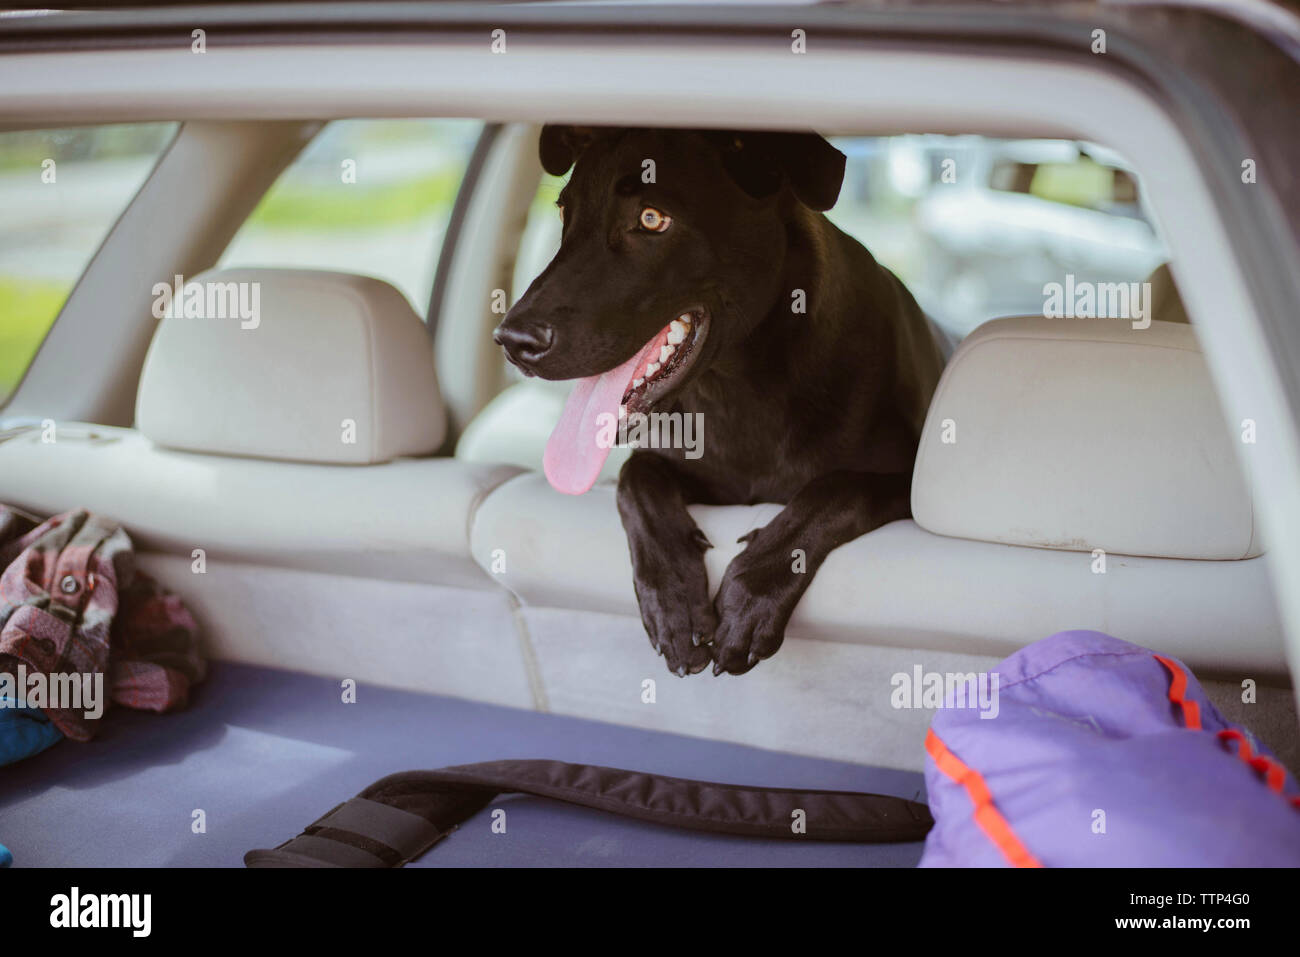 Dog sticking out tongue while rearing up on car seat Stock Photo